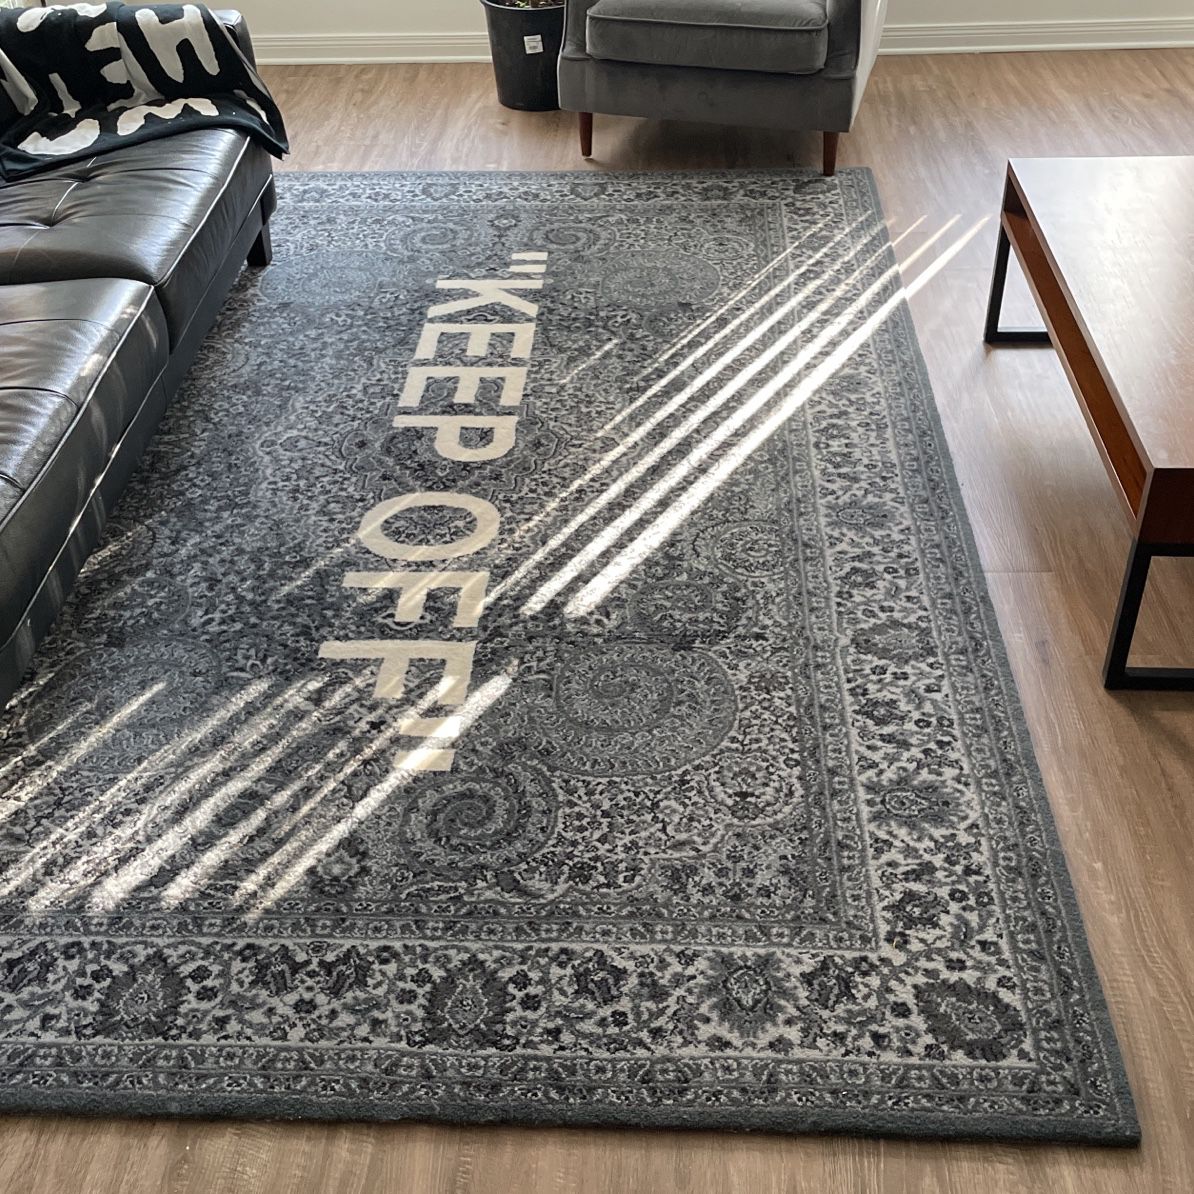 Off White Keep Off Ikea Rug from PKZ : r/snidereps